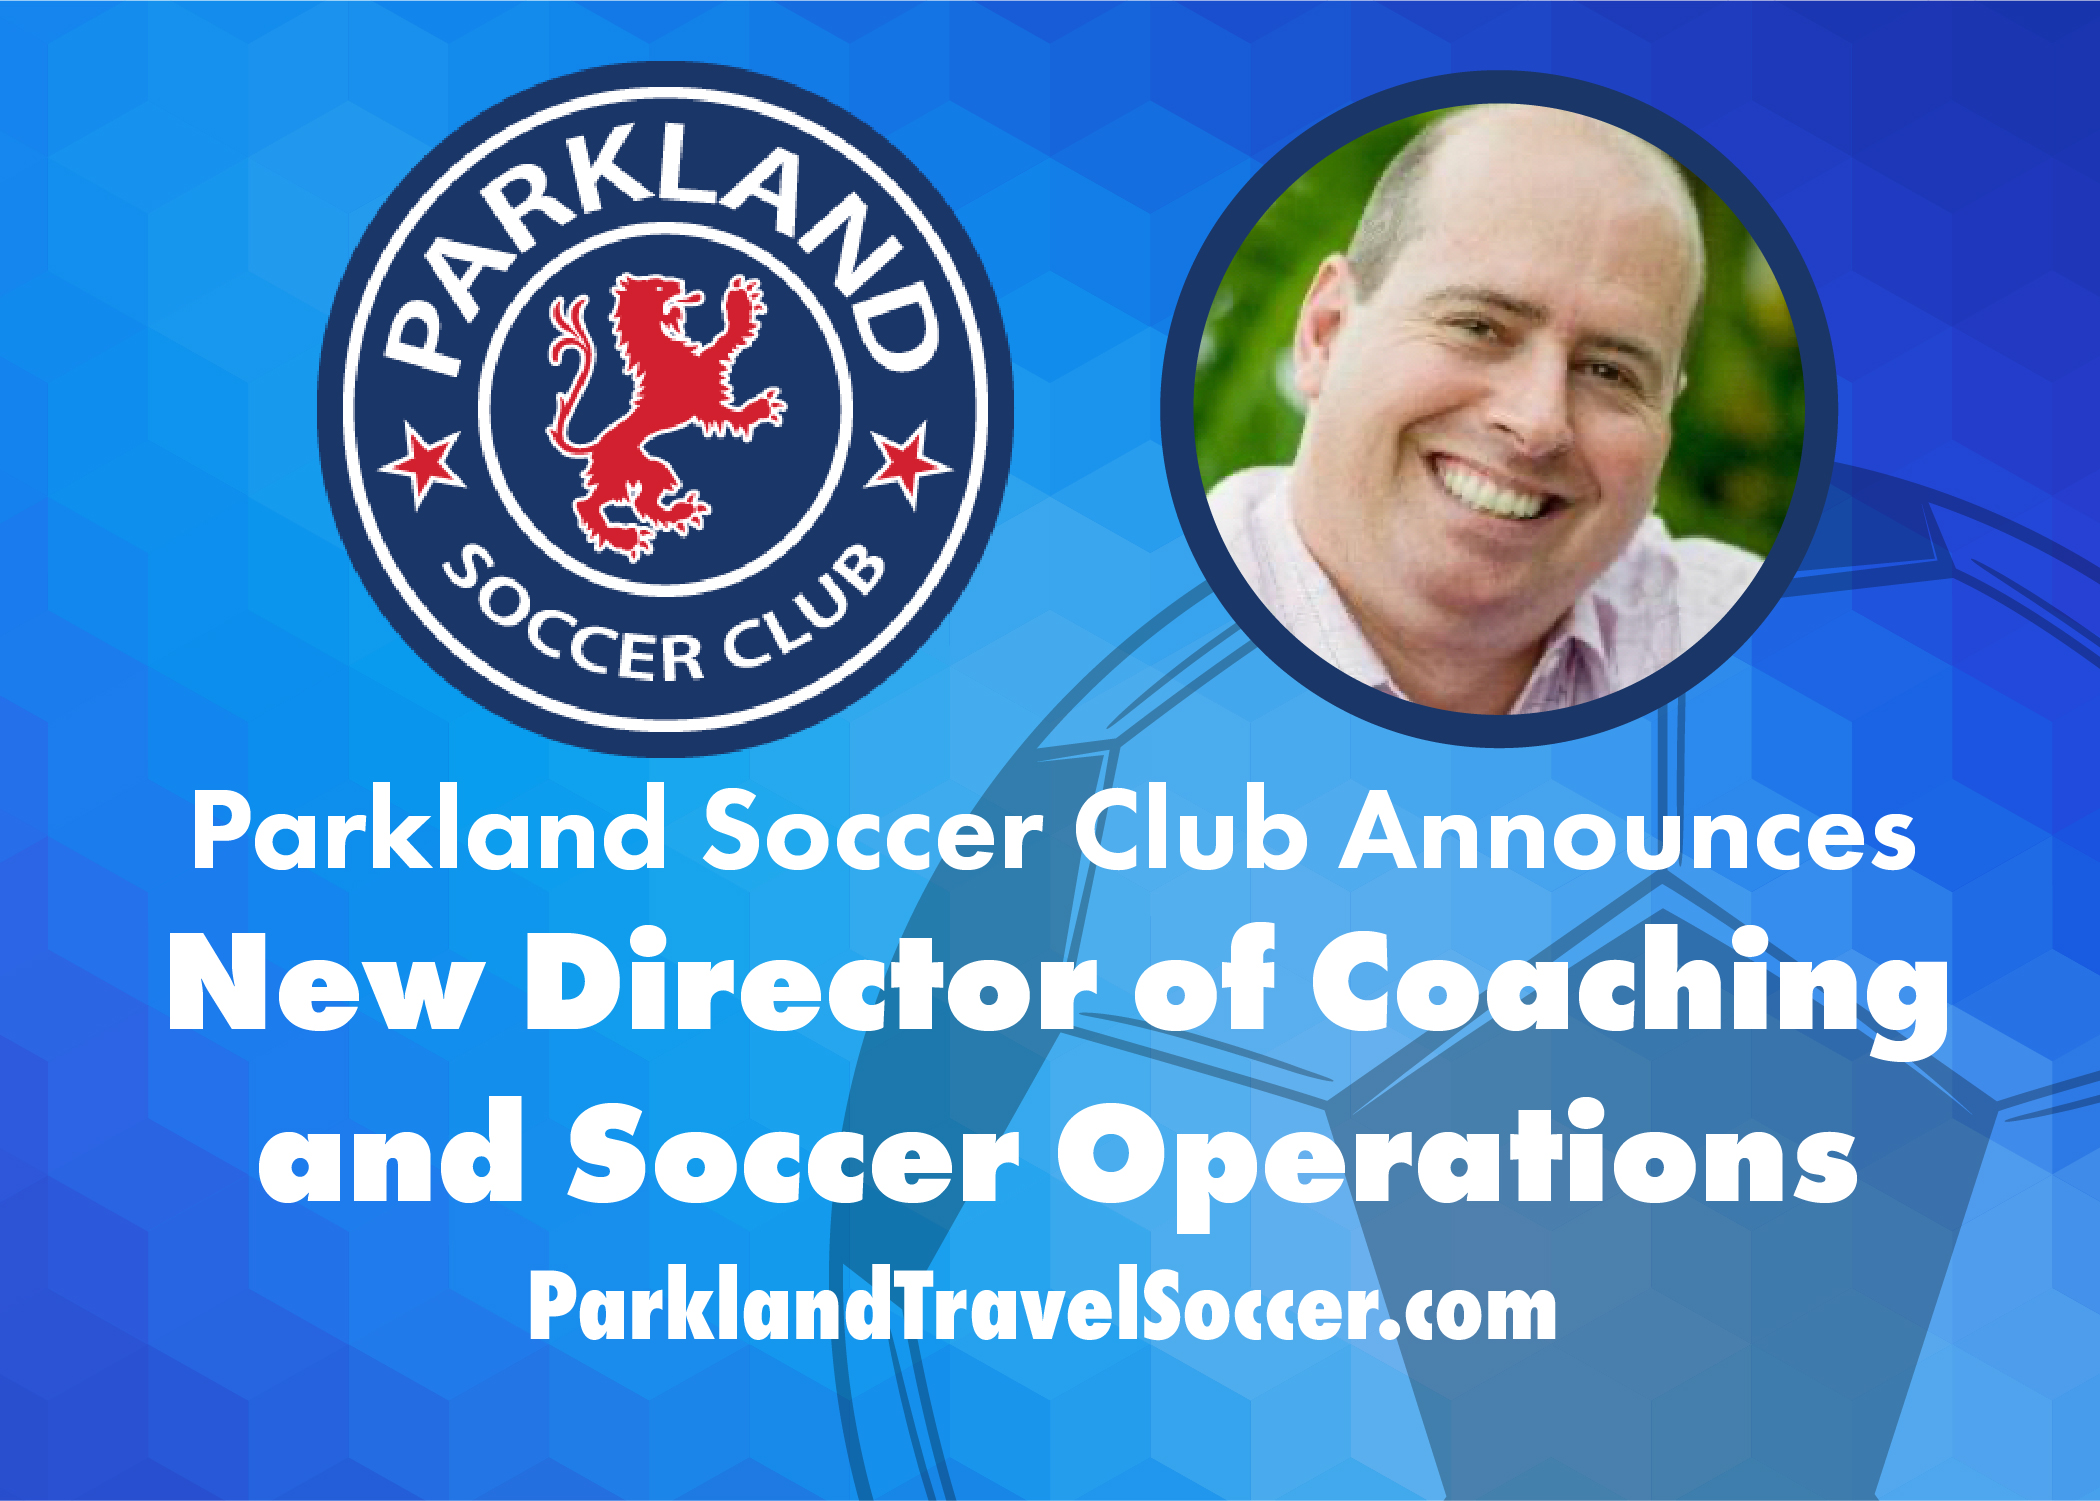 Parkland Soccer Club announces new Director of Coaching and Soccer Operations